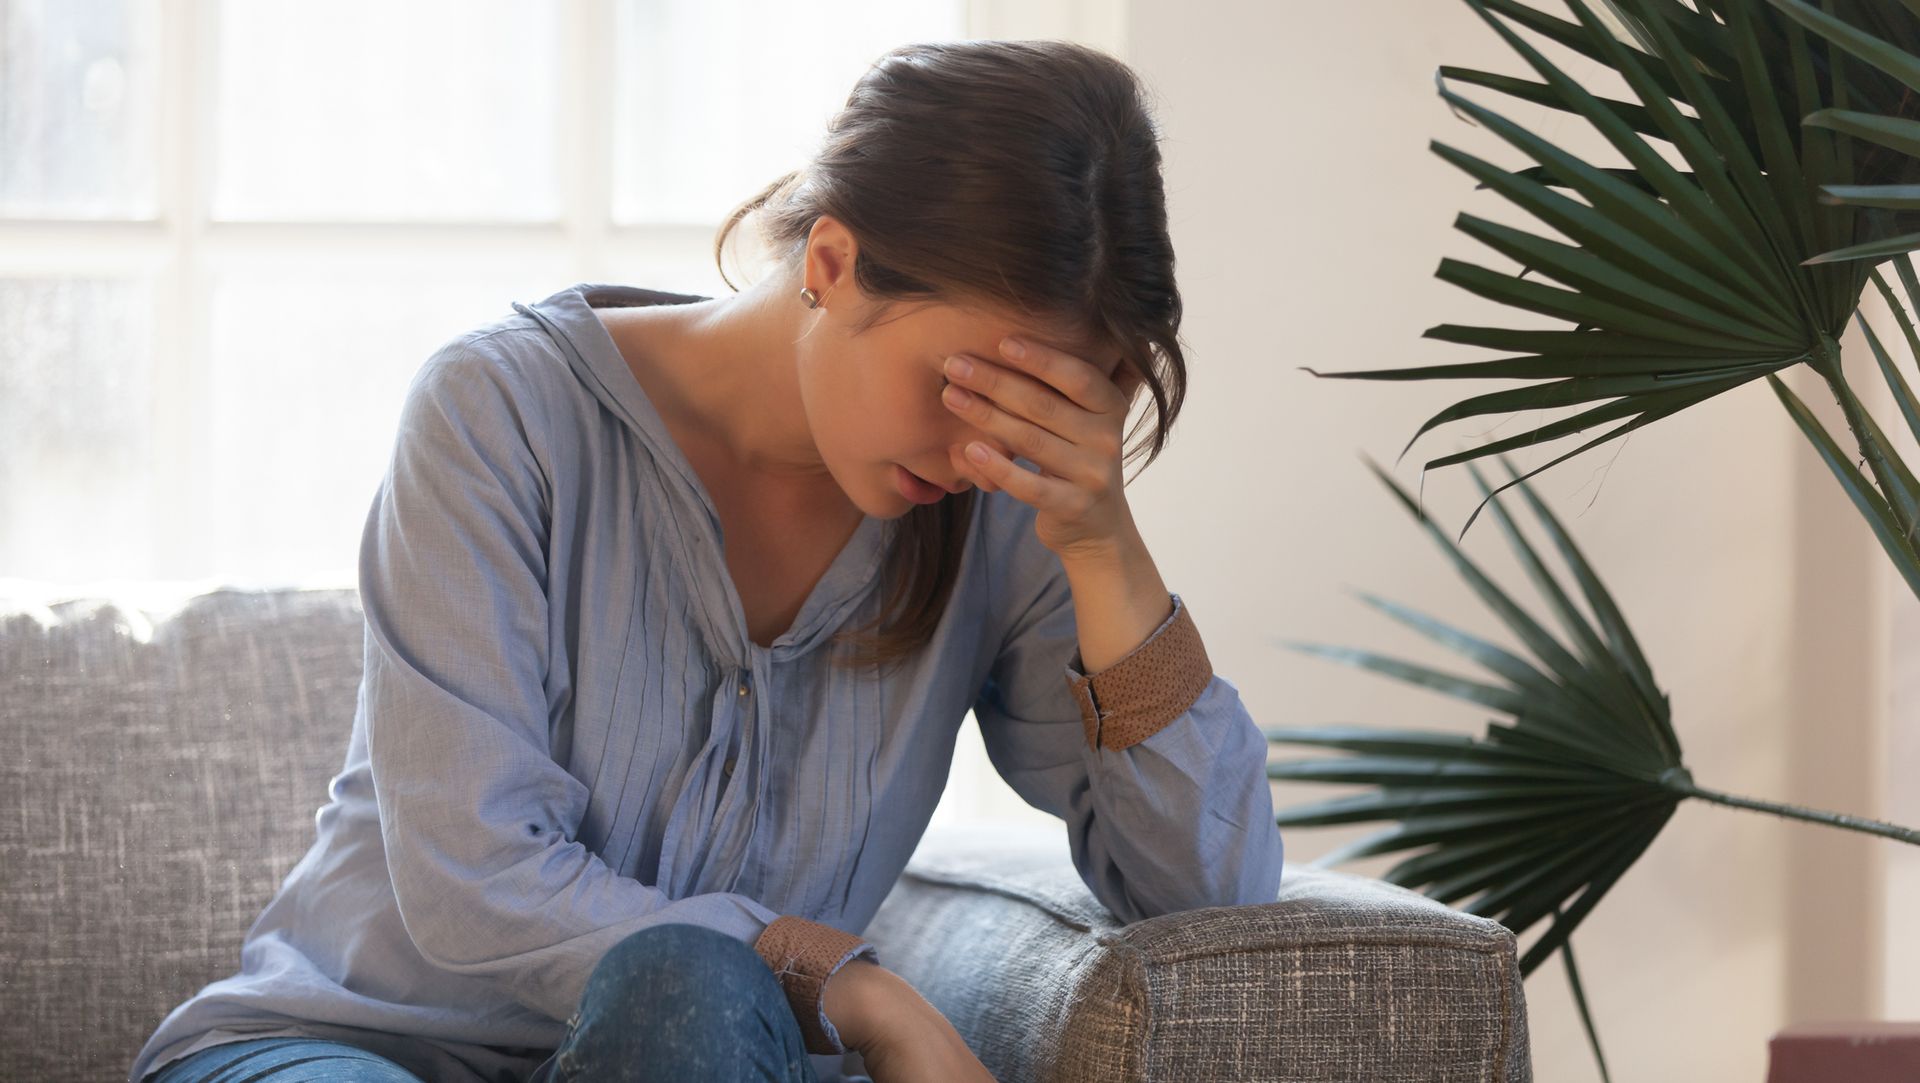 rise in number of women suffering financial abuse due to cost of living crisis